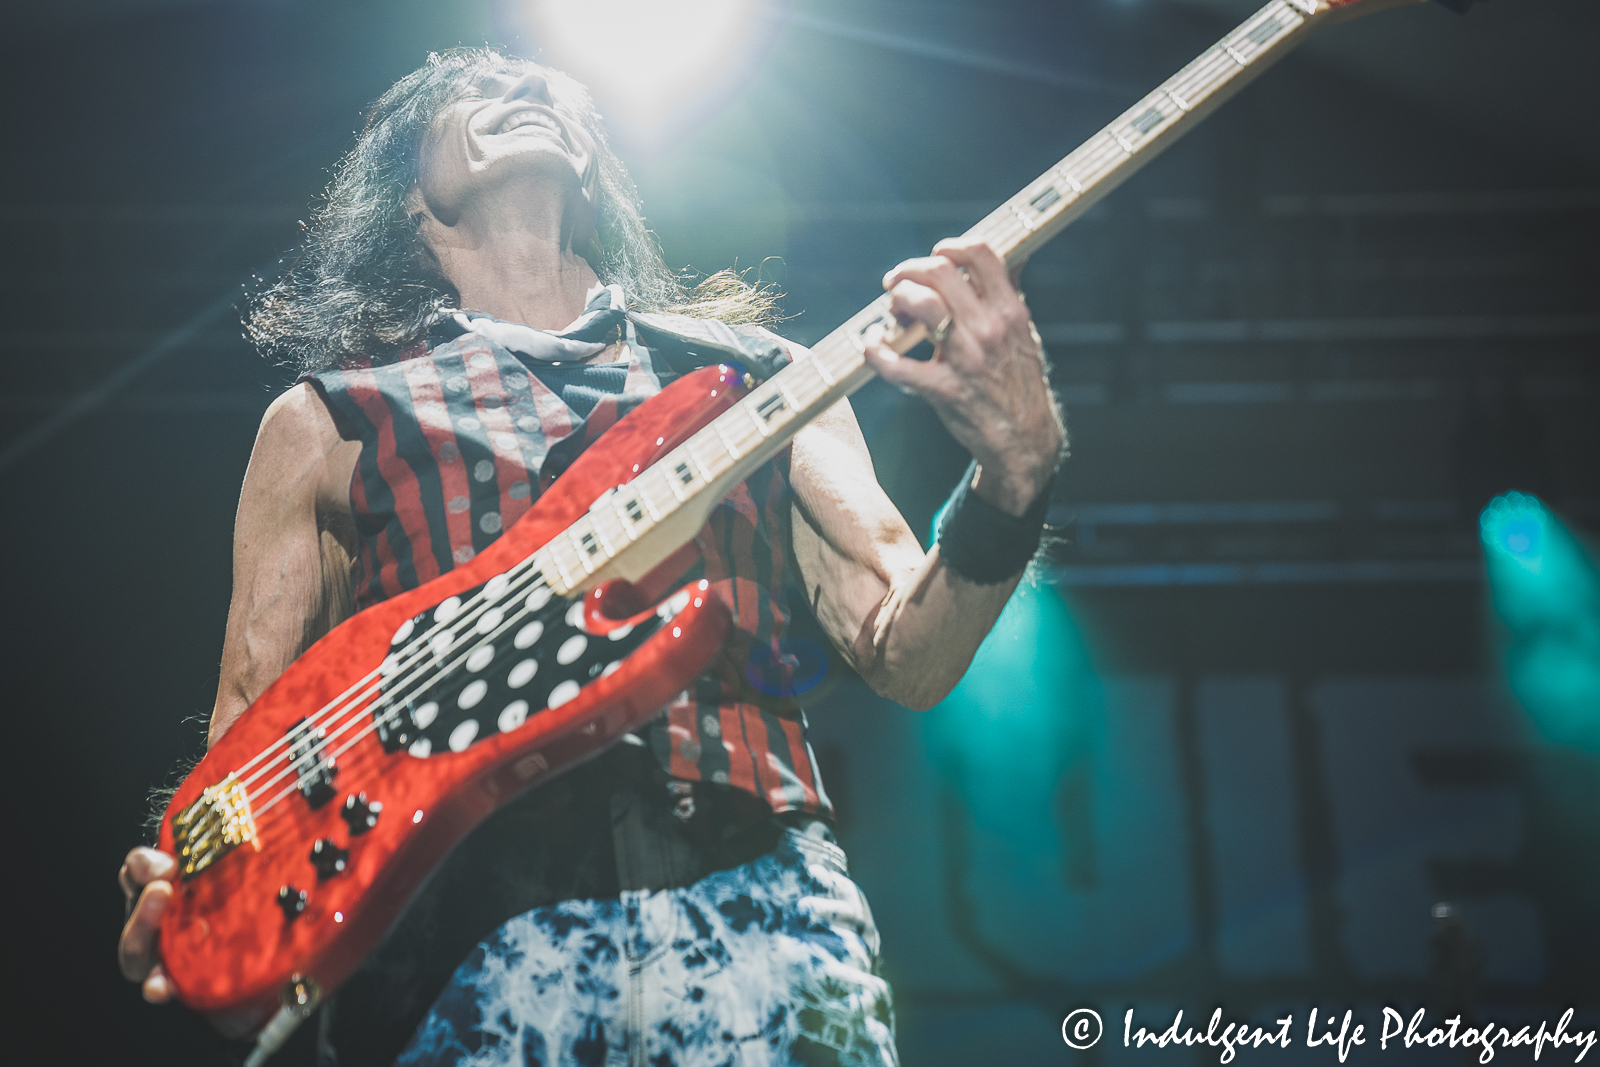 Bass guitar player Rudy Sarzo of Quiet Riot playing live at Ameristar Casino's Star Pavilion in Kansas City, MO on July 29, 2022.